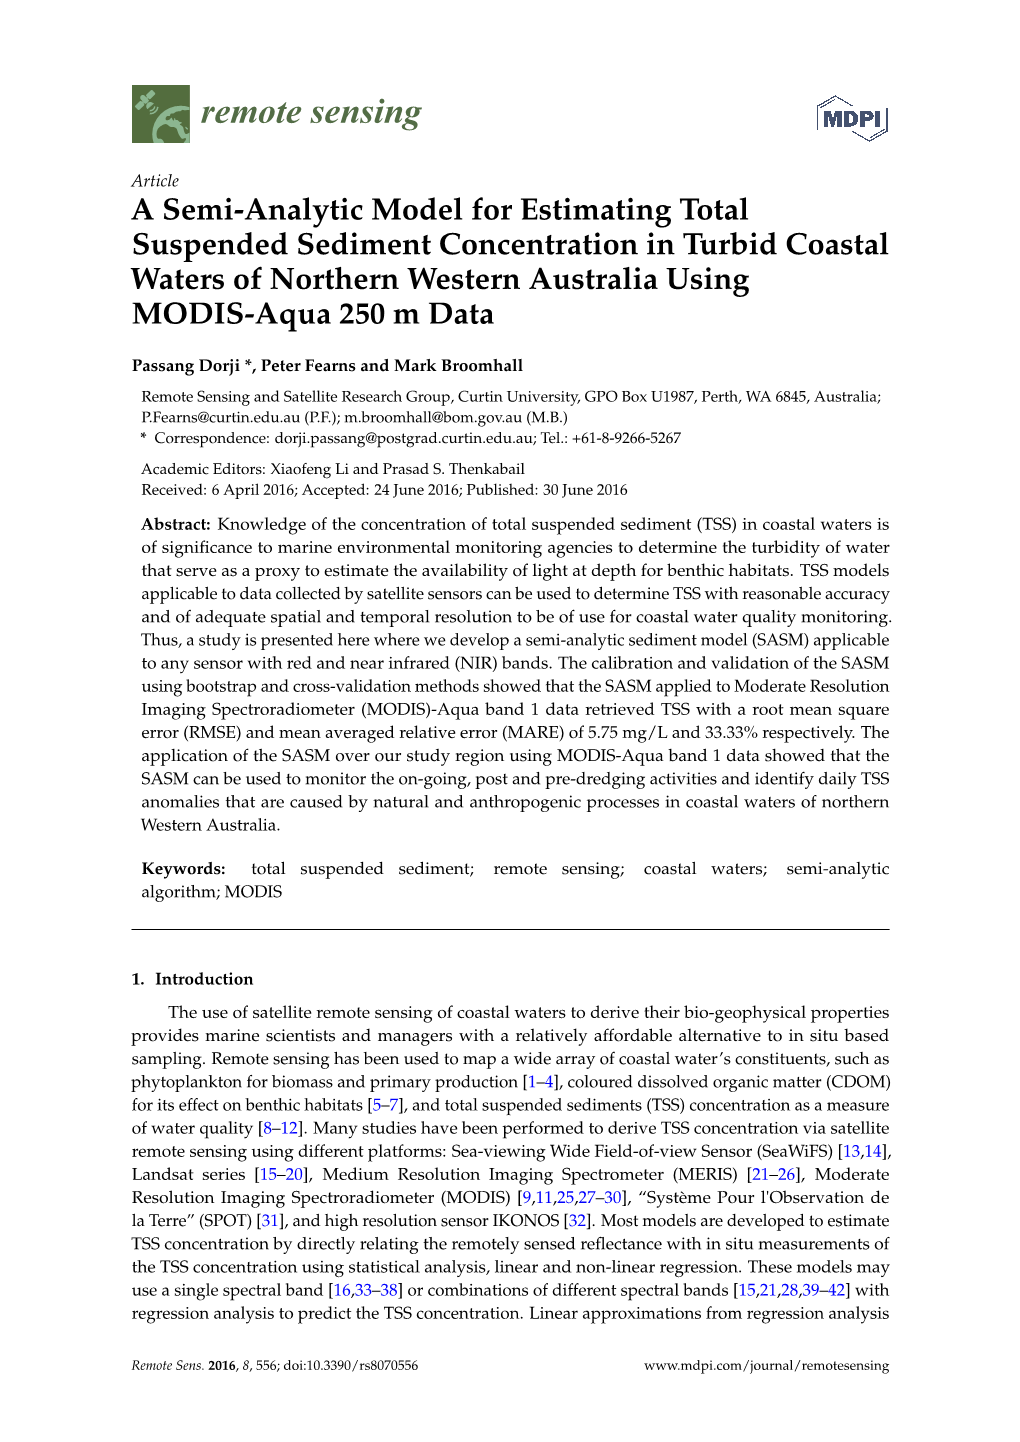 A Semi-Analytic Model for Estimating Total Suspended Sediment Concentration in Turbid Coastal Waters of Northern Western Australia Using MODIS-Aqua 250 M Data